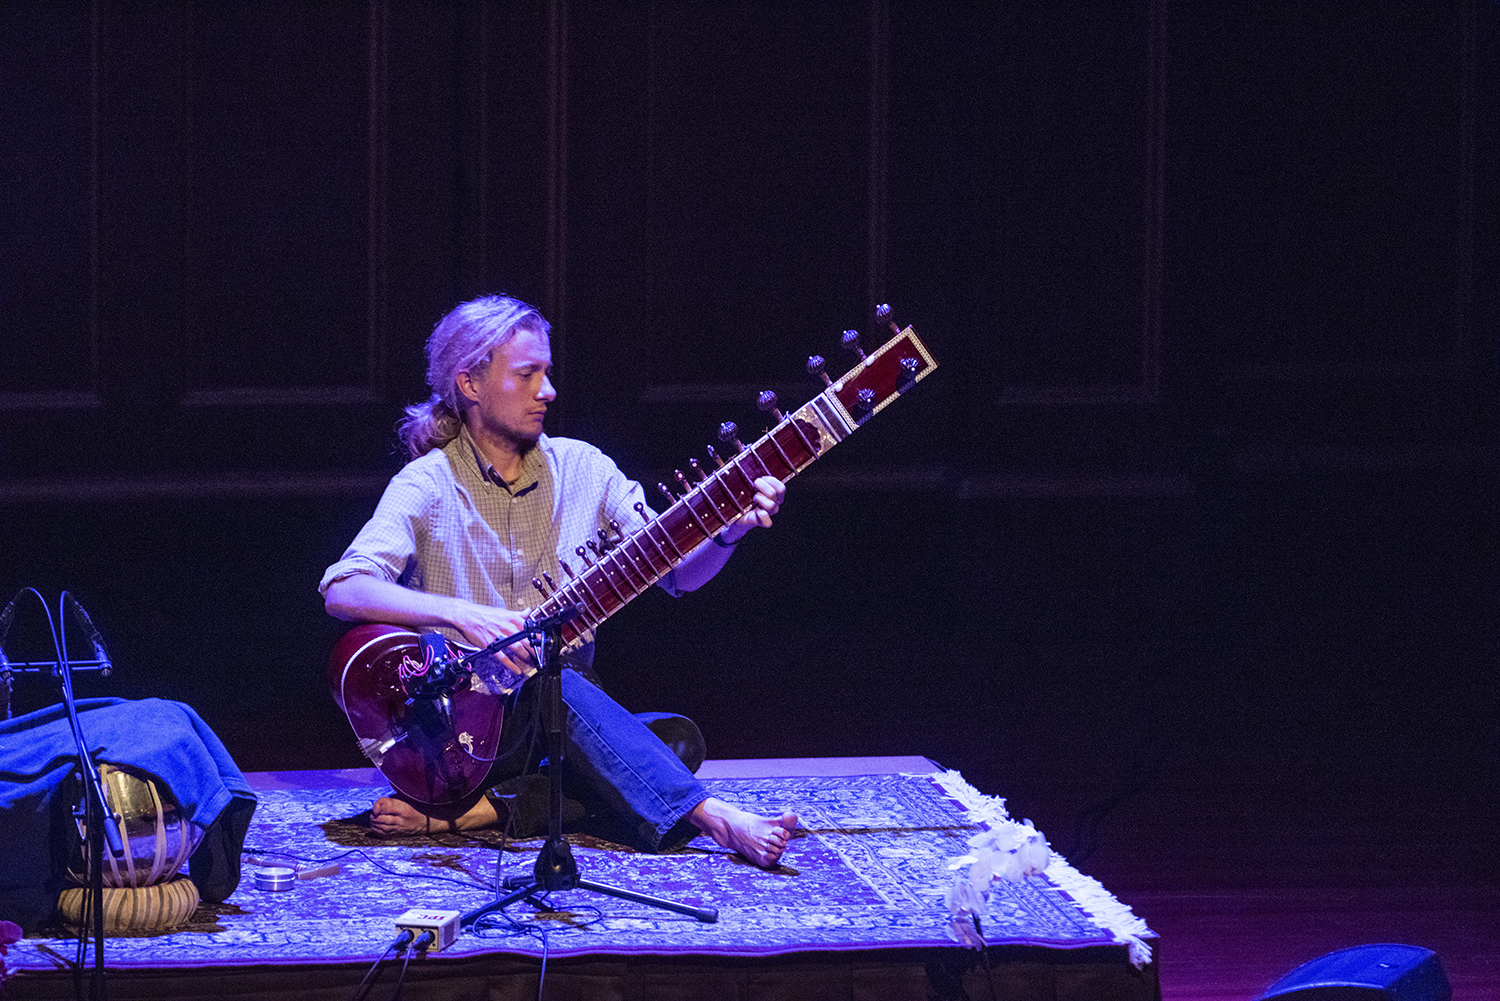 Peter Row's son playing a sitar